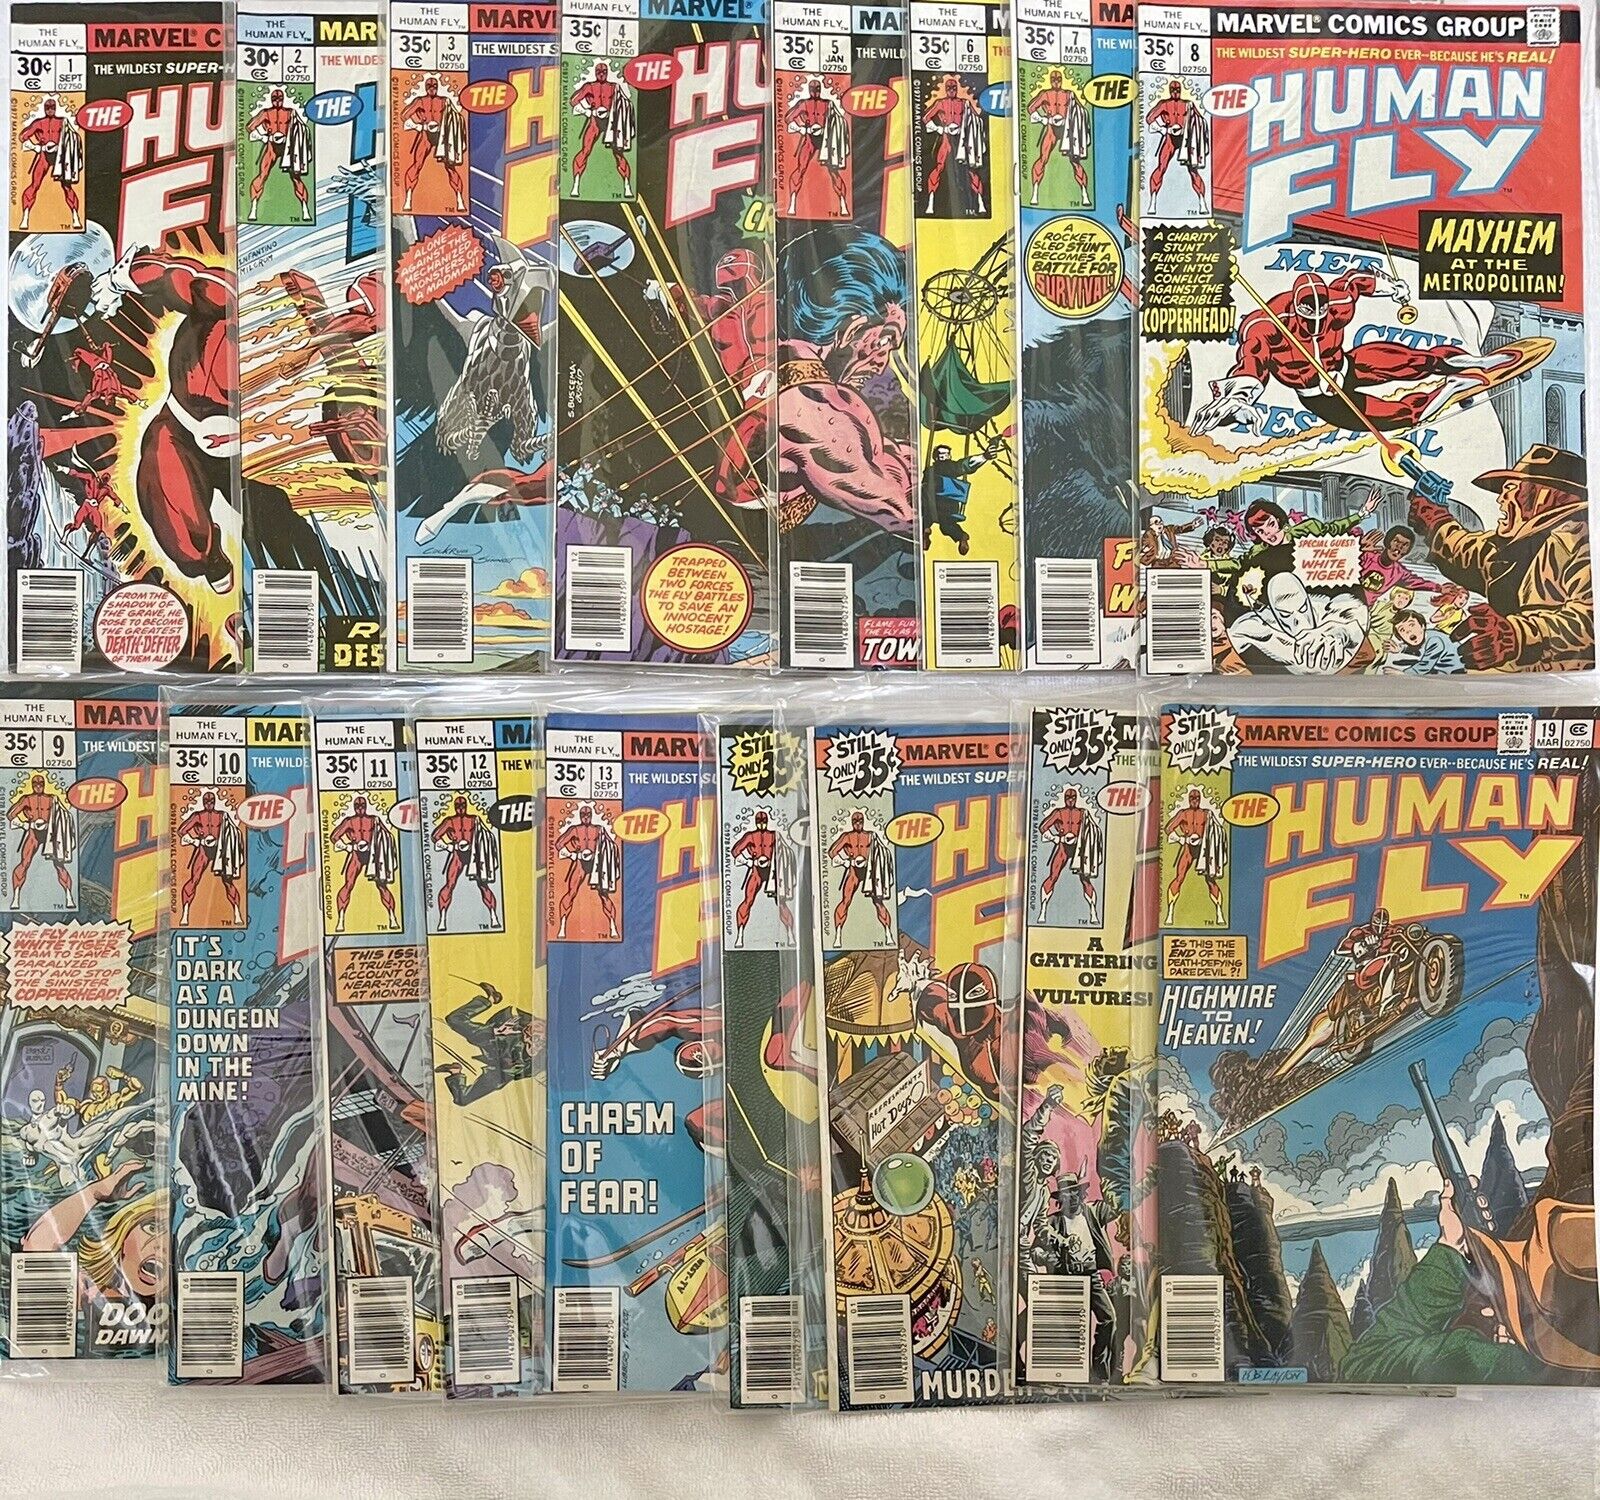 The Human Fly (Marvel, 1978) #1-13, 15, 17-19 